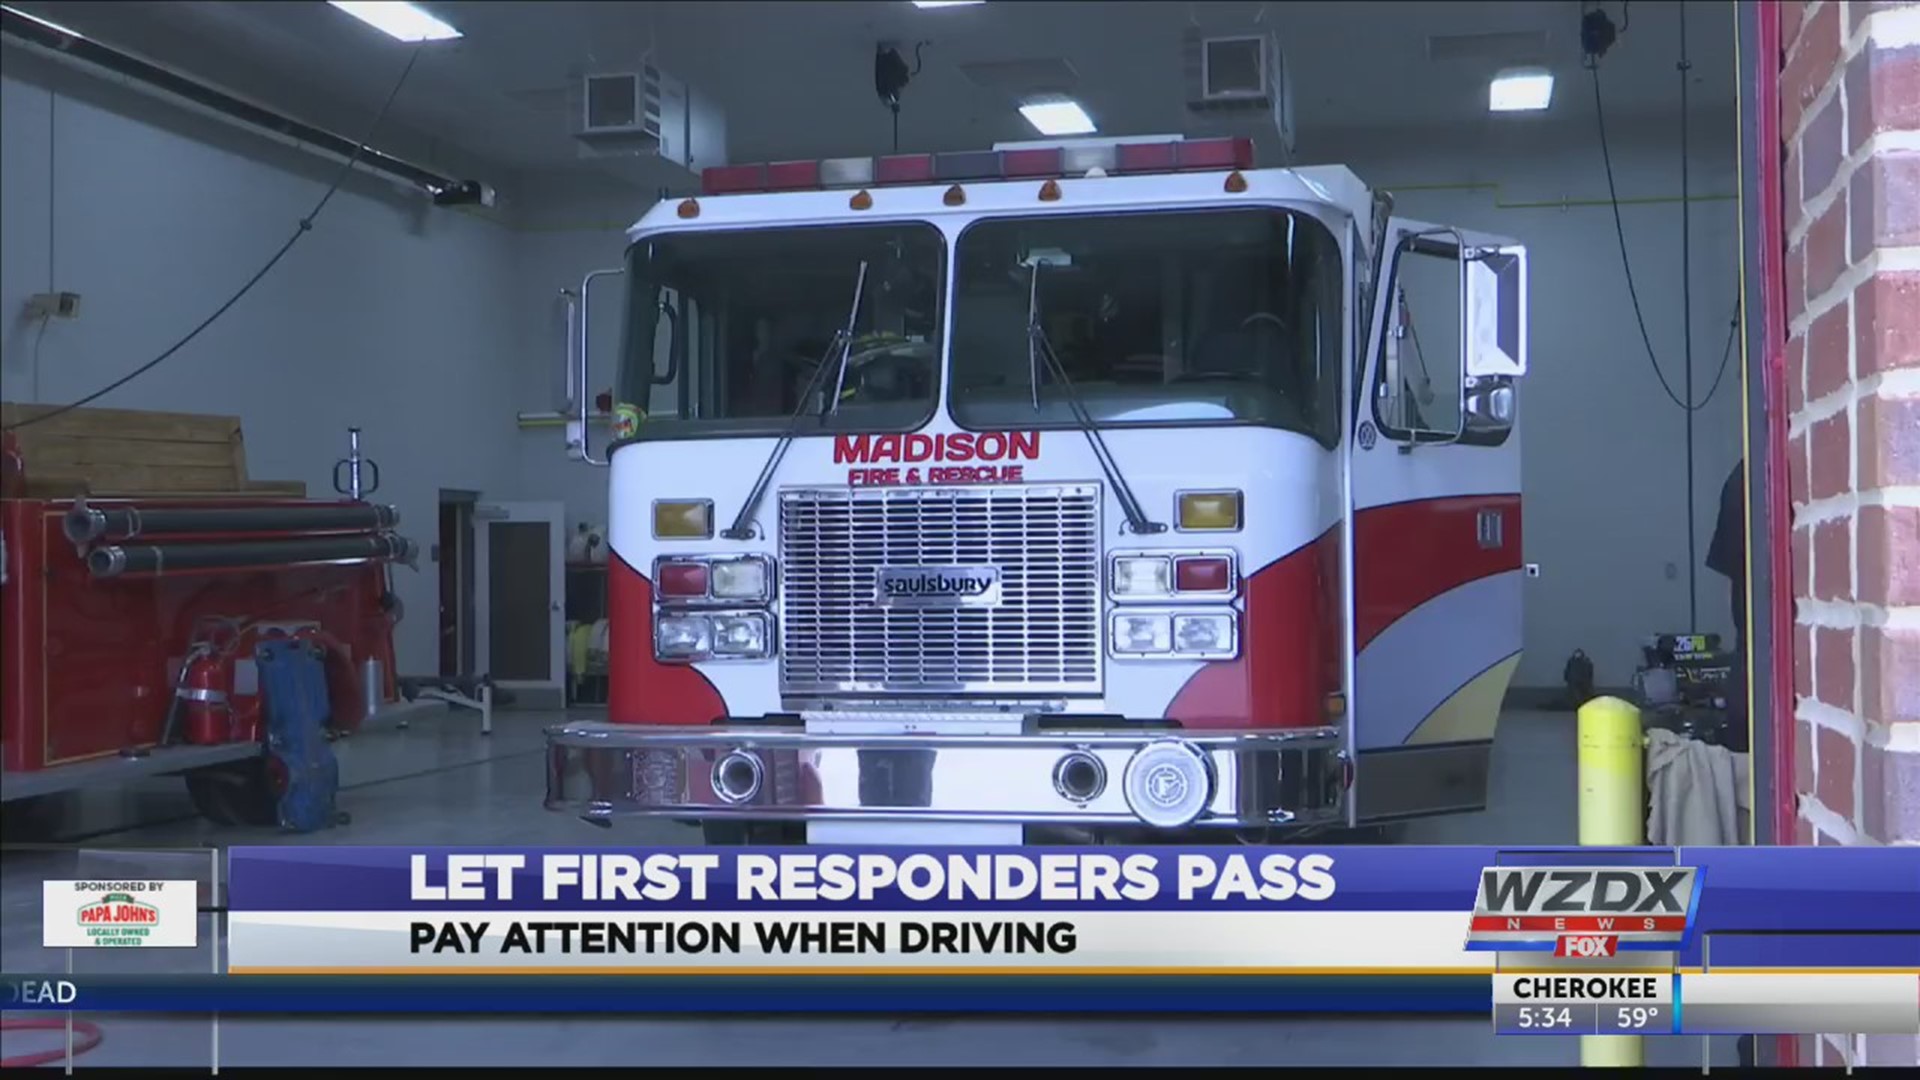 We wanted to reiterate the importance of yielding to first responders as they're getting where they need to go. This is especially true in bad driving conditions, like we are having here in the Valley, when more emergencies might happen.